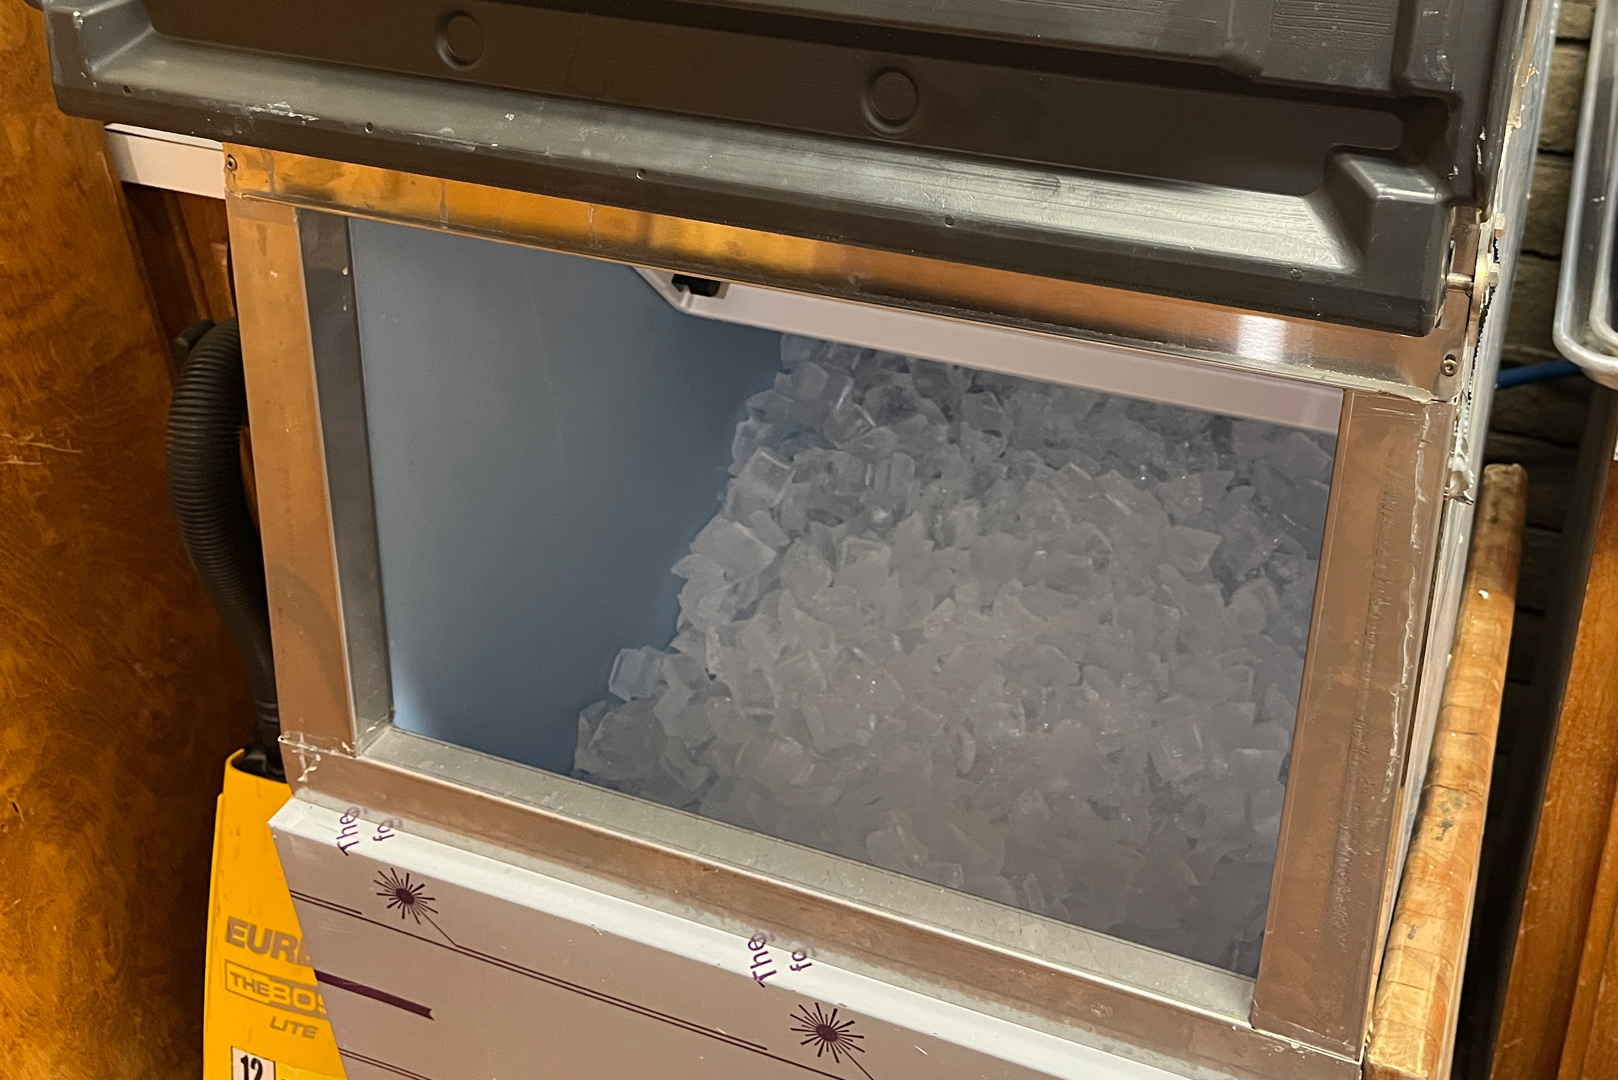 A view of the ice machine located in the laundry area